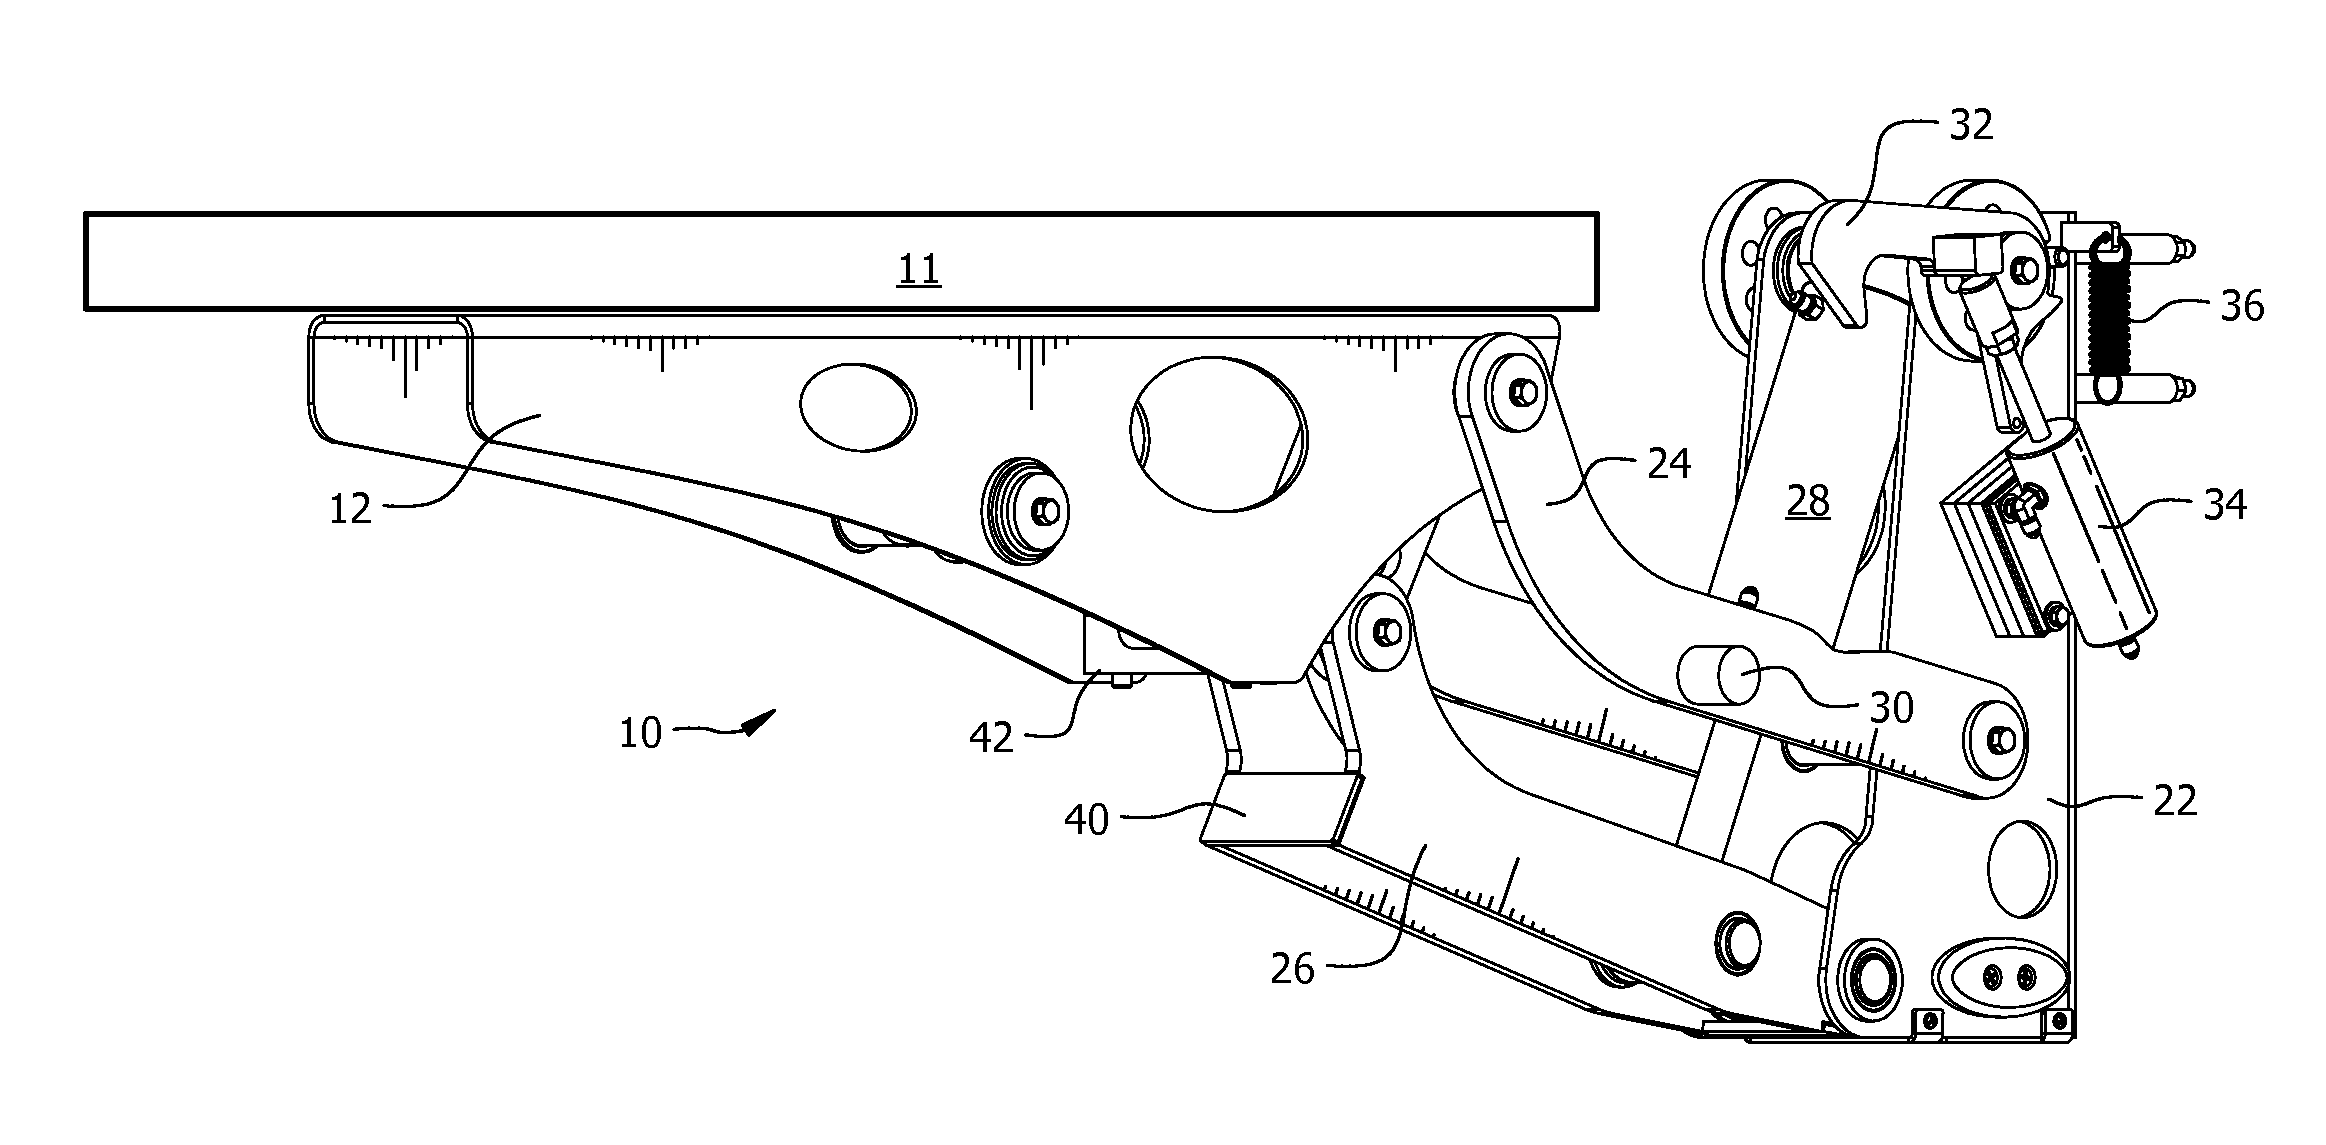 Lift mechanism for added stability for a swim platform of a boat